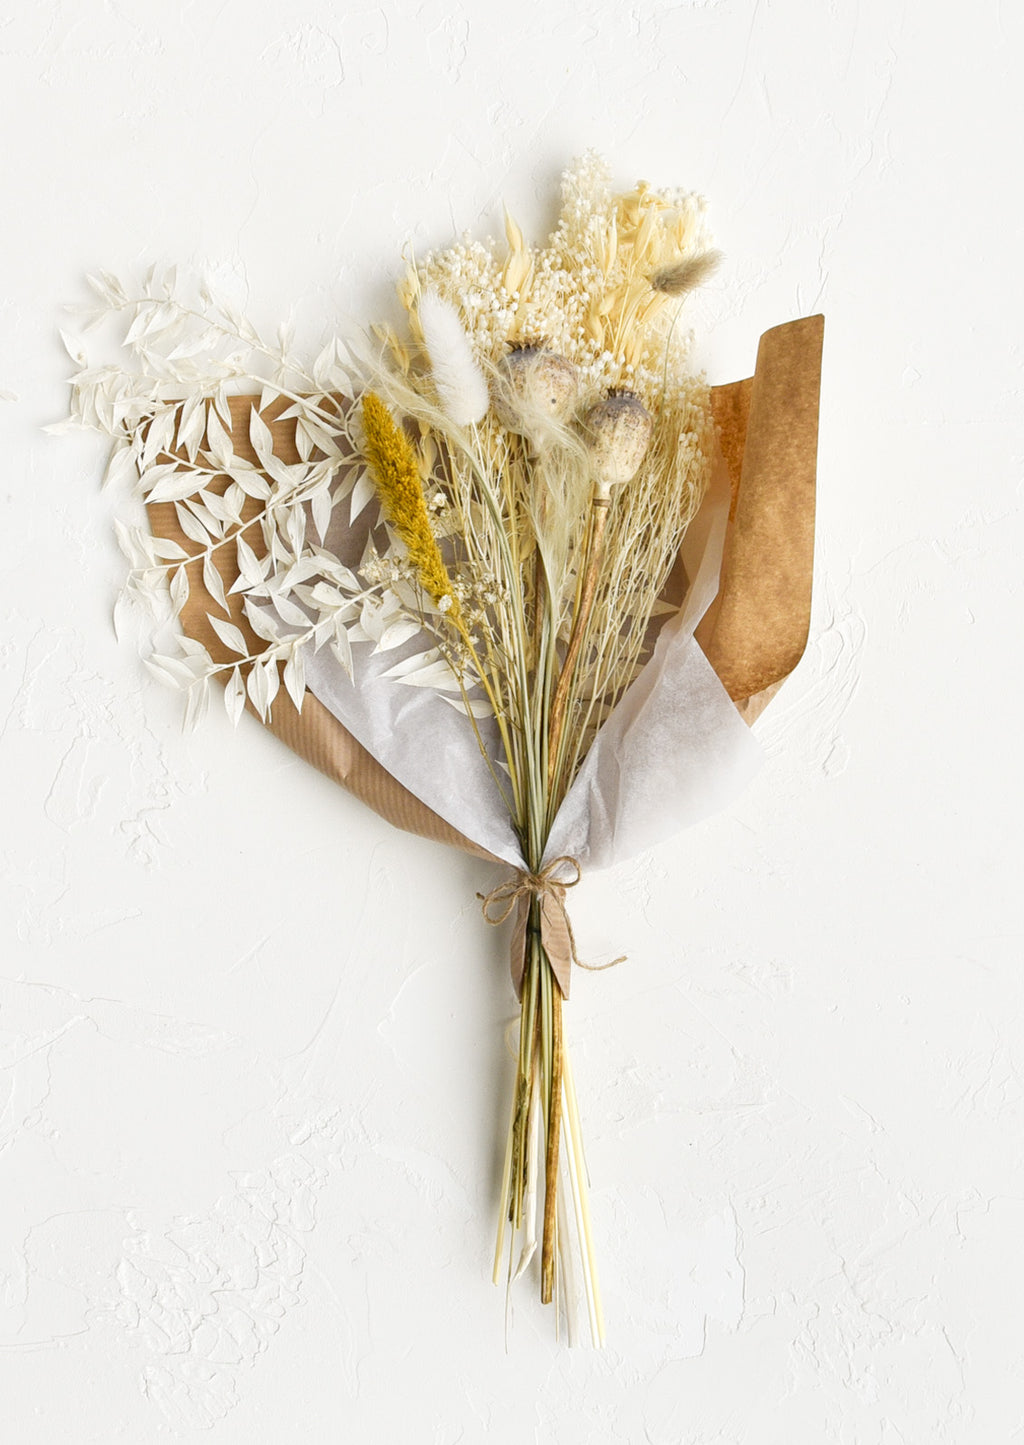 Ivory Multi: A dried floral bouquet in tones of ivory.